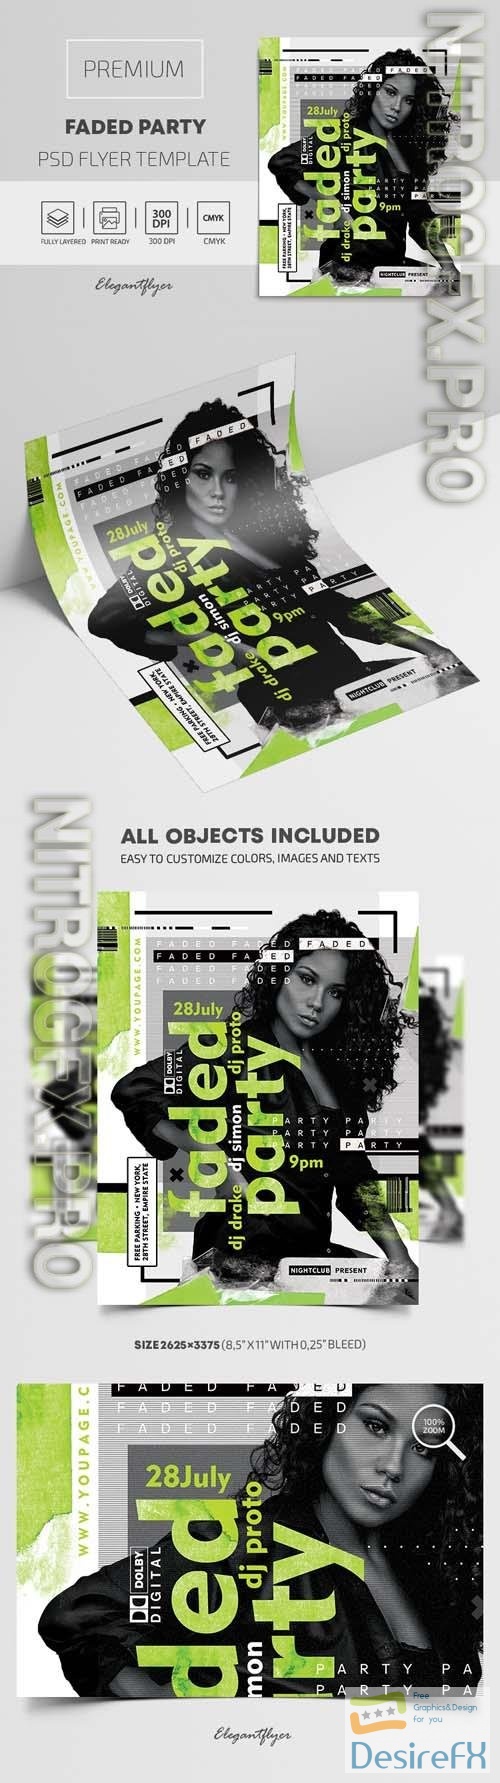 Faded Party Premium PSD Flyer Template